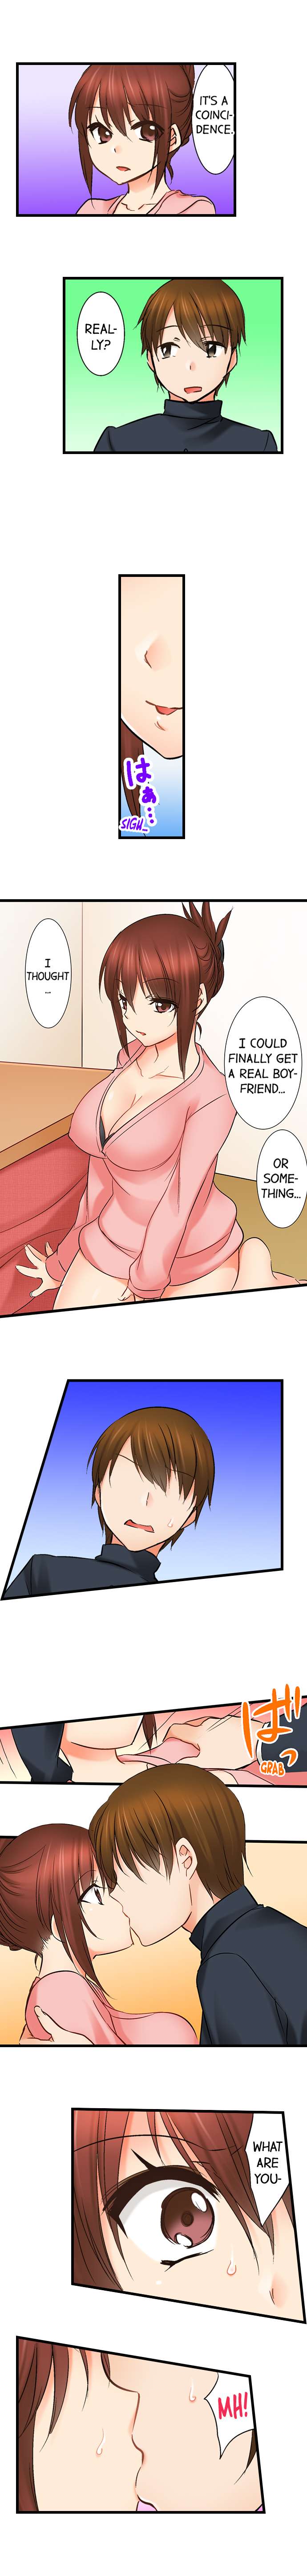 Touching My Older Sister Under the Table - Chapter 20 Page 3